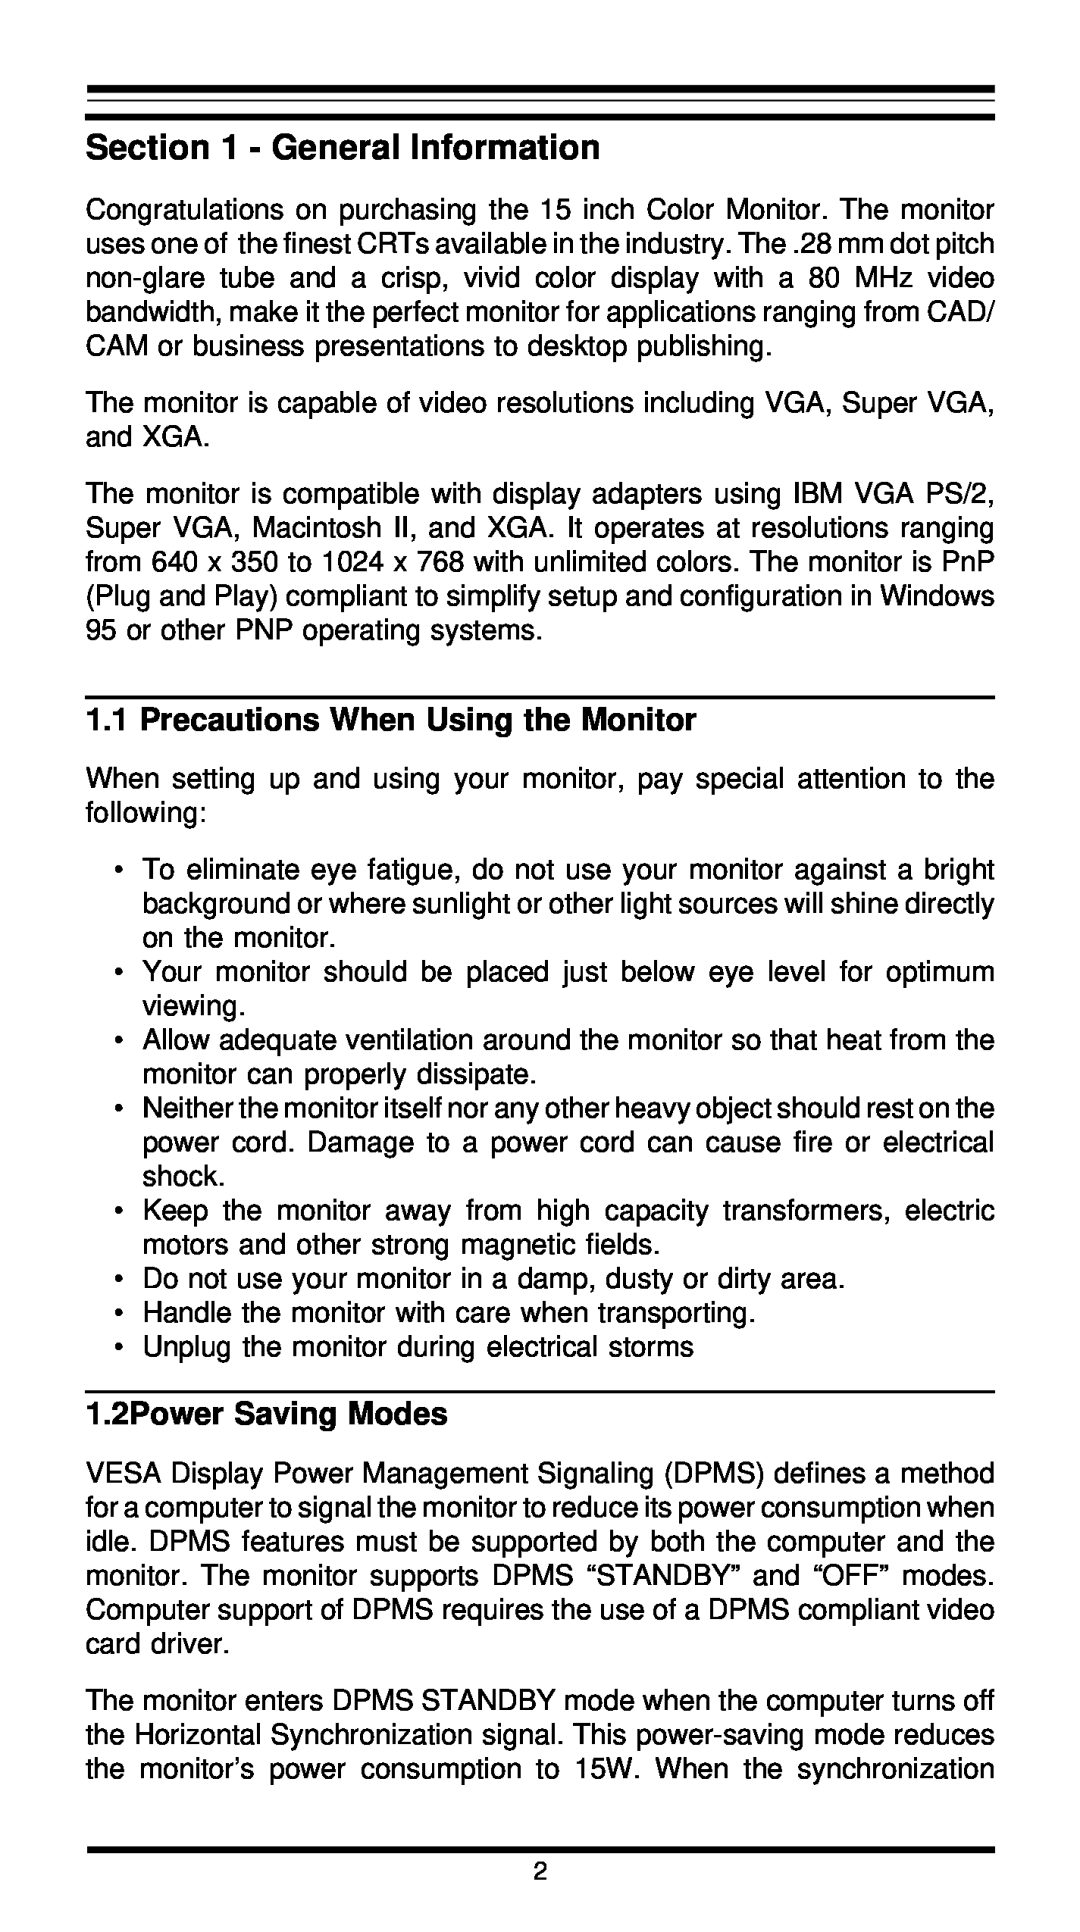 MaxTech XT5861 user manual General Information, Precautions When Using the Monitor, 1.2Power Saving Modes 